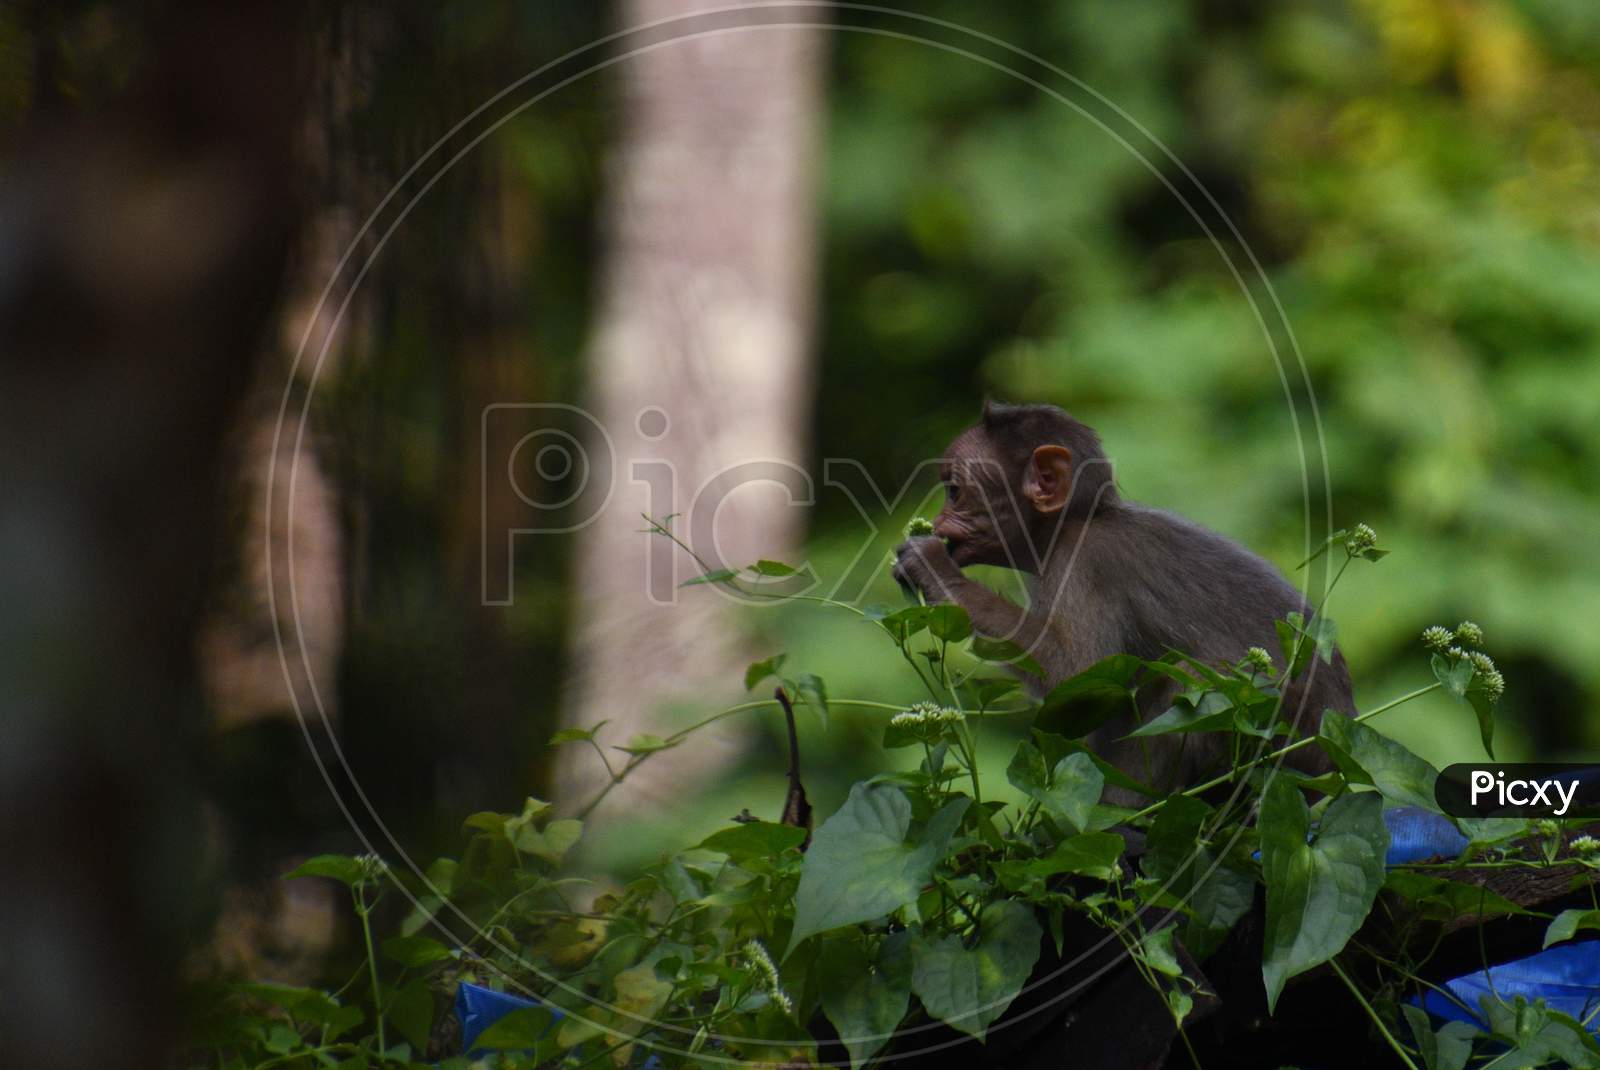 A Small Monkey Eating Flower Buds